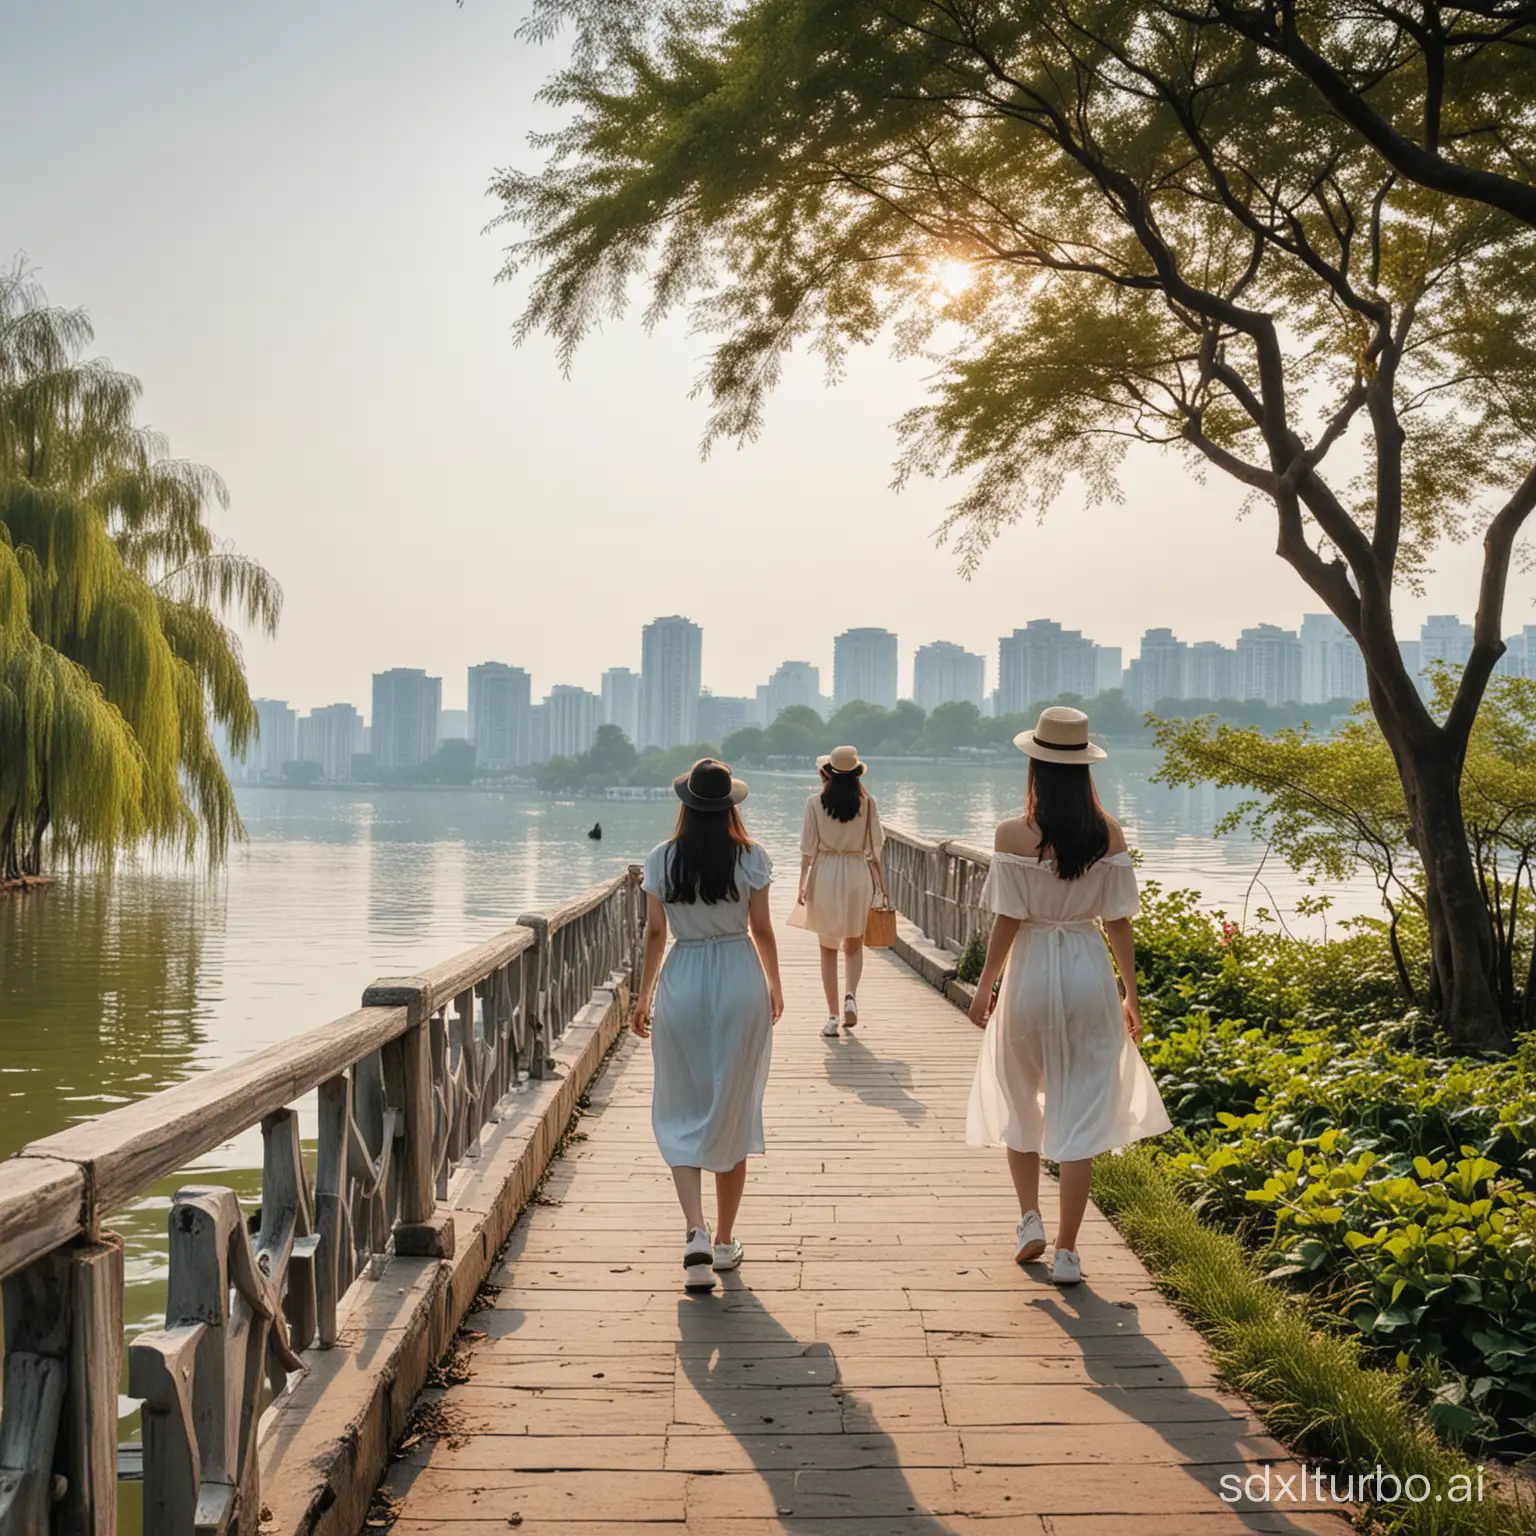 Chinese girls are taking a walk by West Lake.